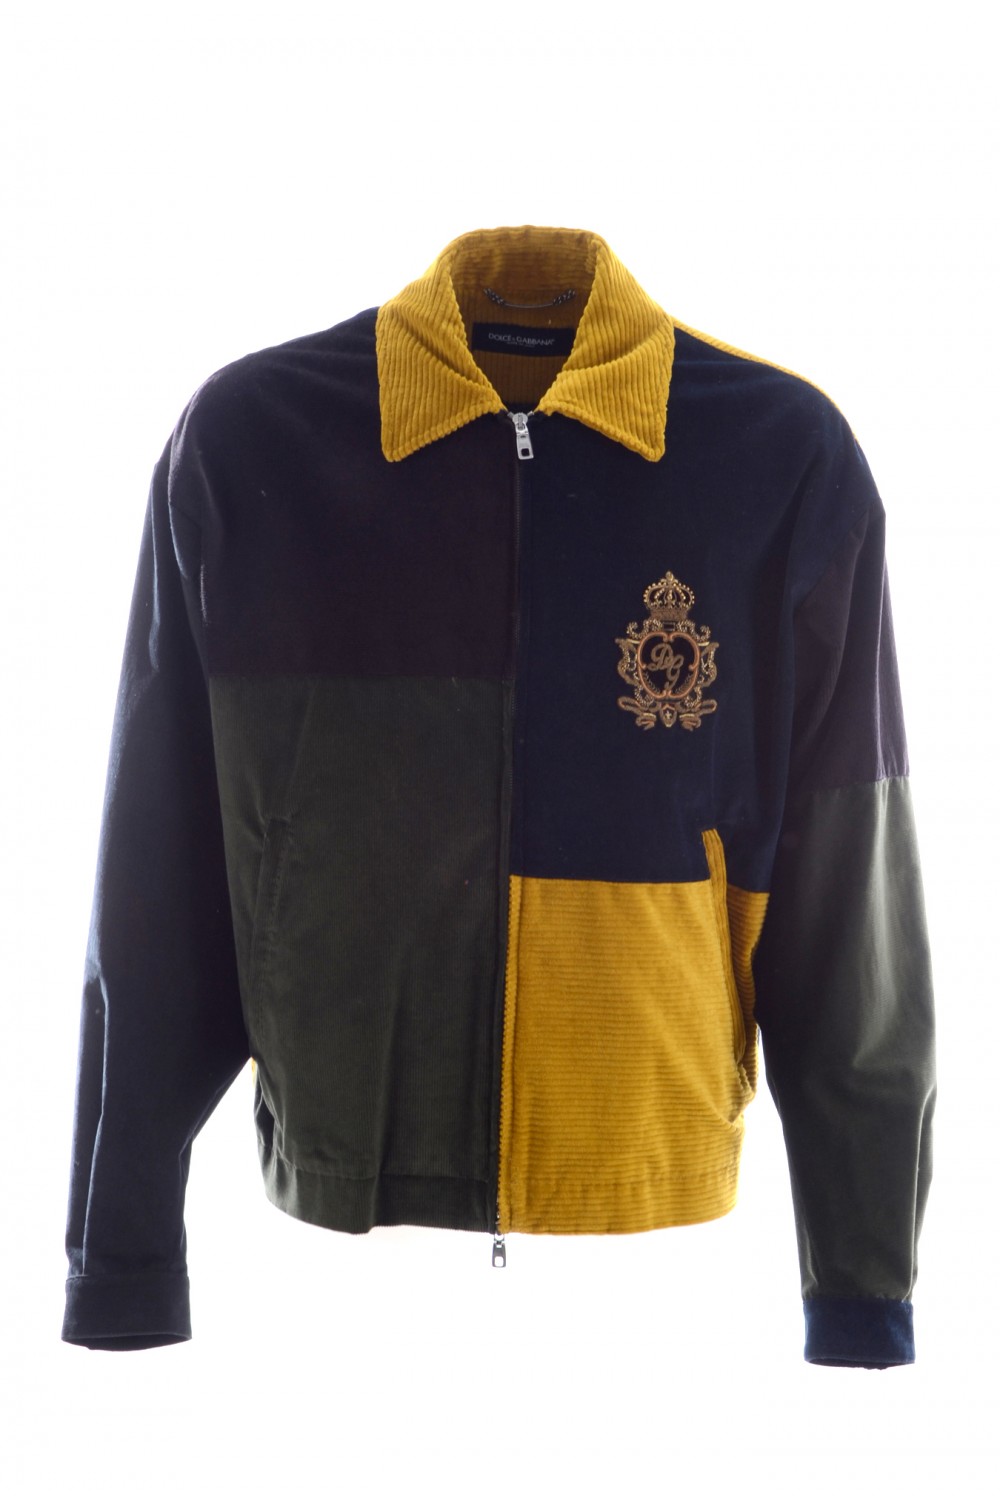 Men's Hooded quilted nylon jacket with logo, DOLCE & GABBANA